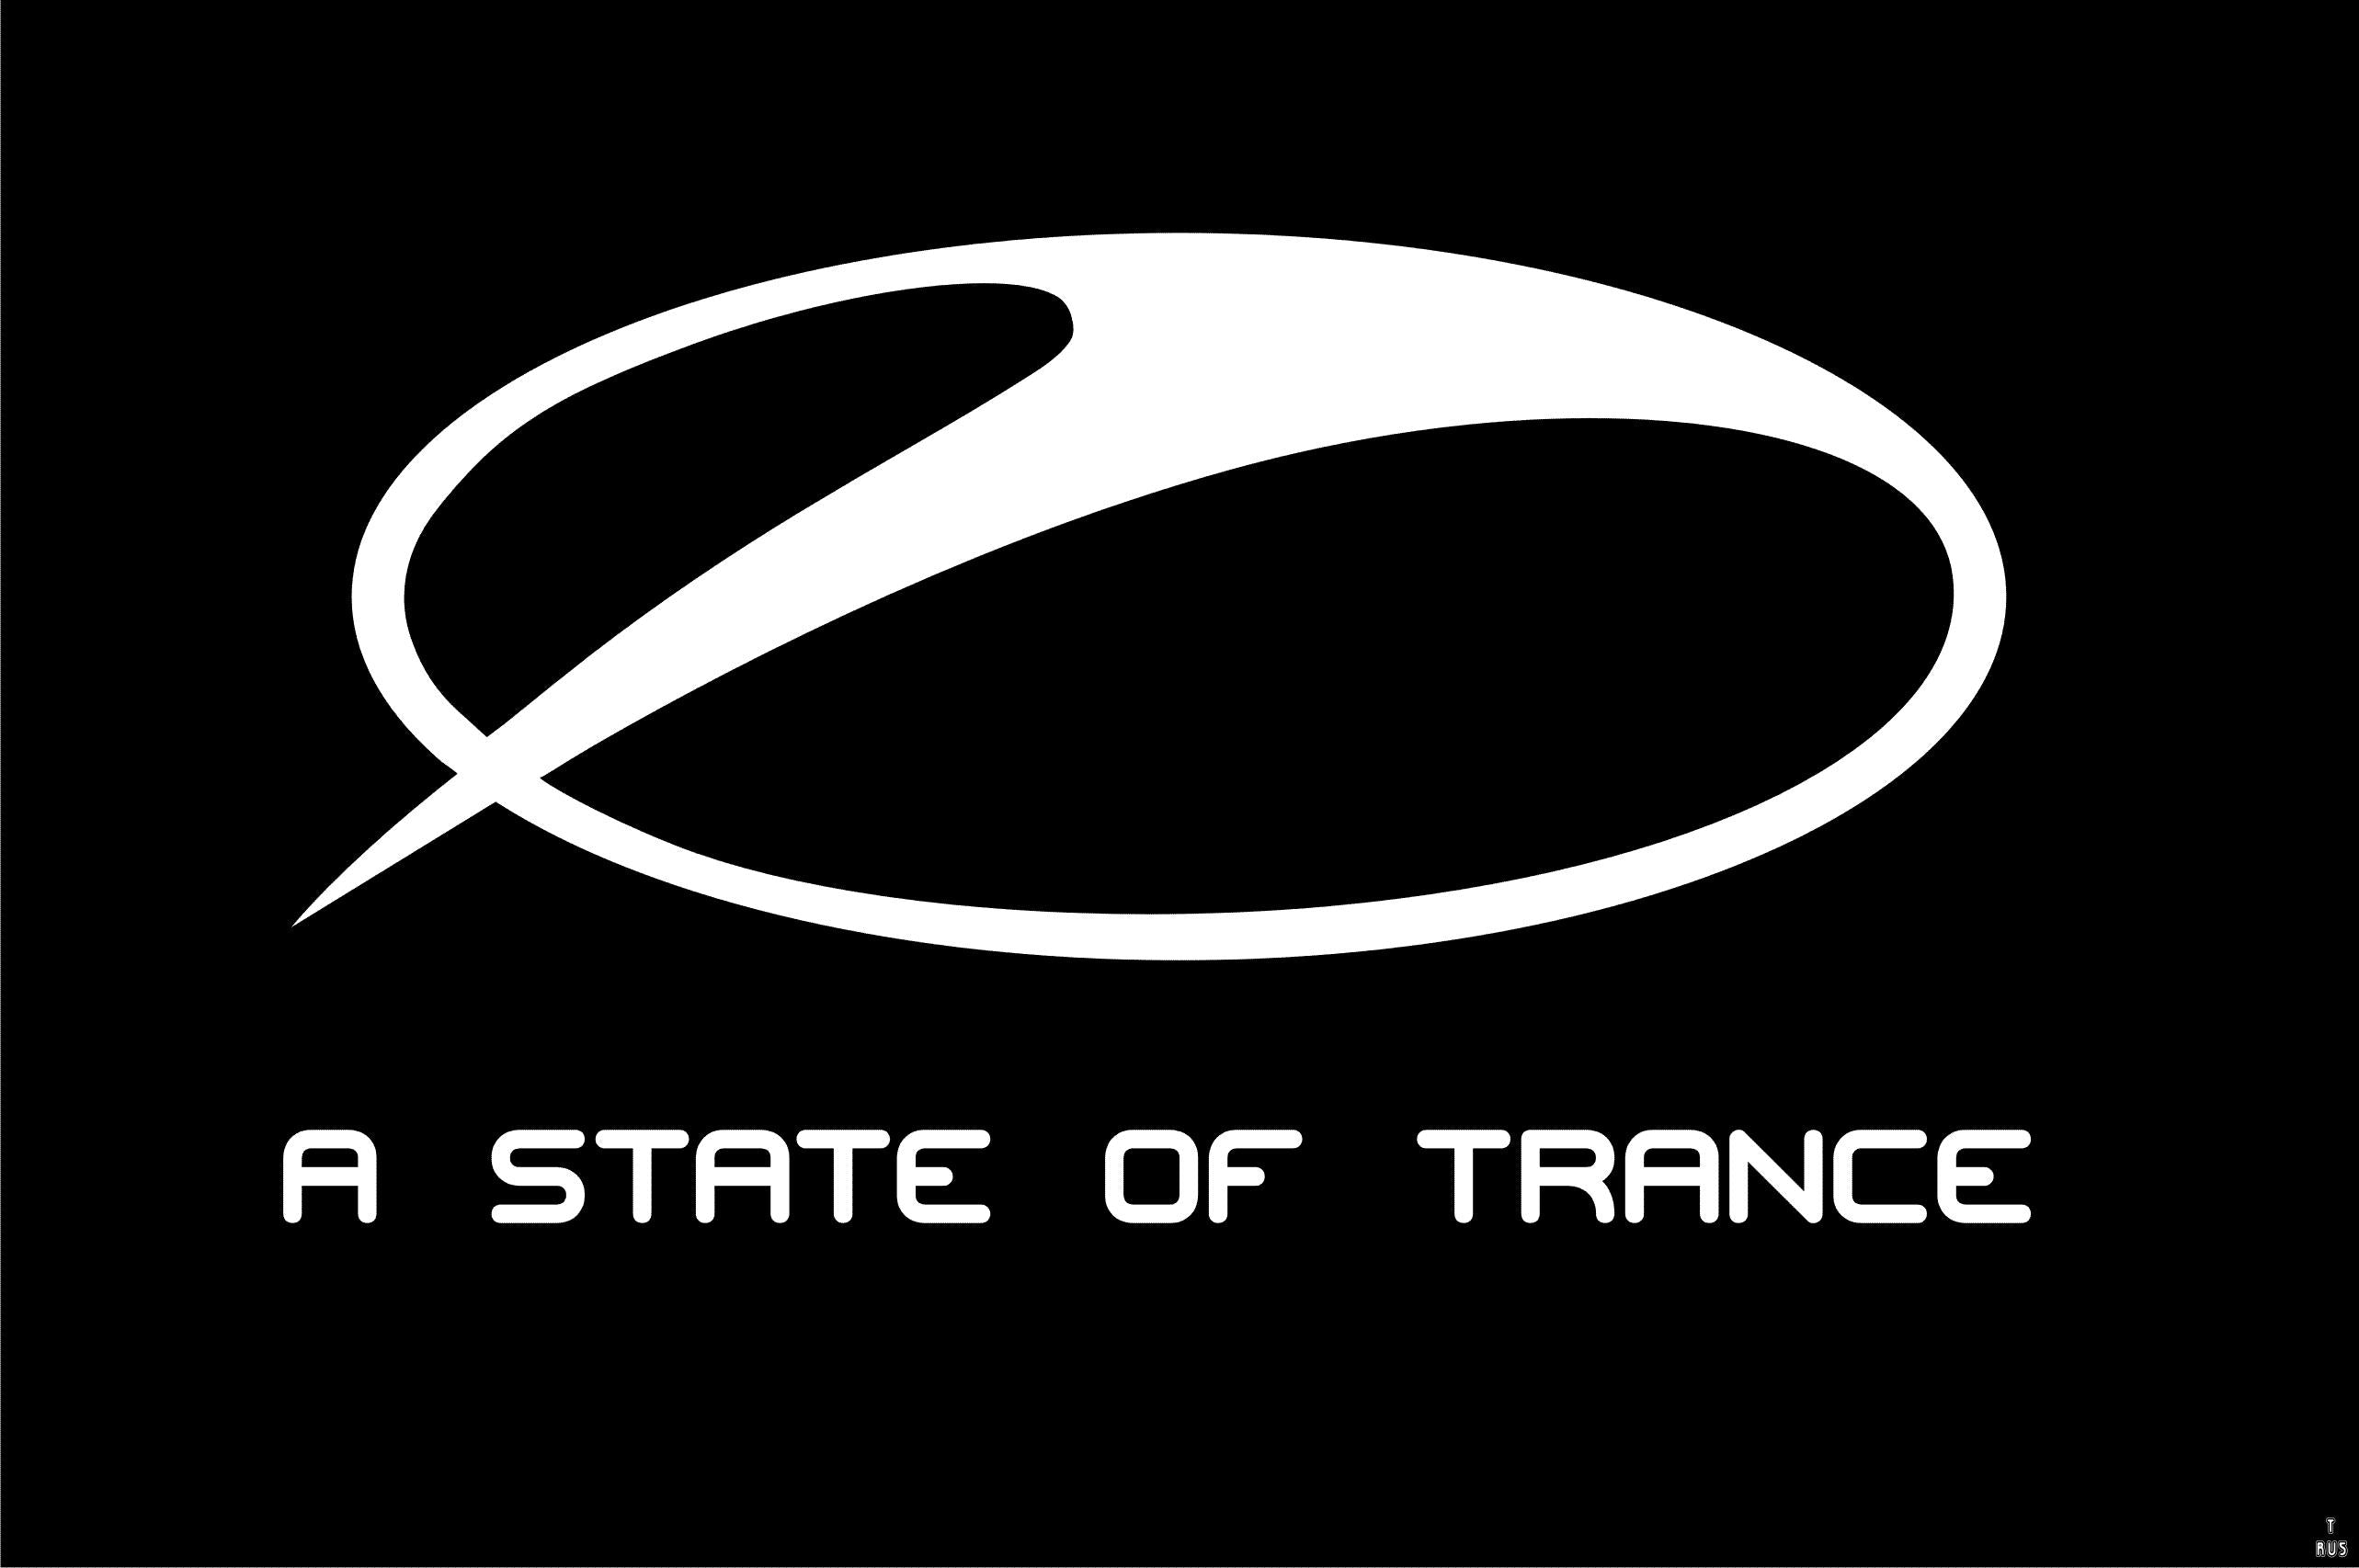 A State of Trance ASOT 650 Birthday Audio & Video DJ-Sets Compilation (2014)